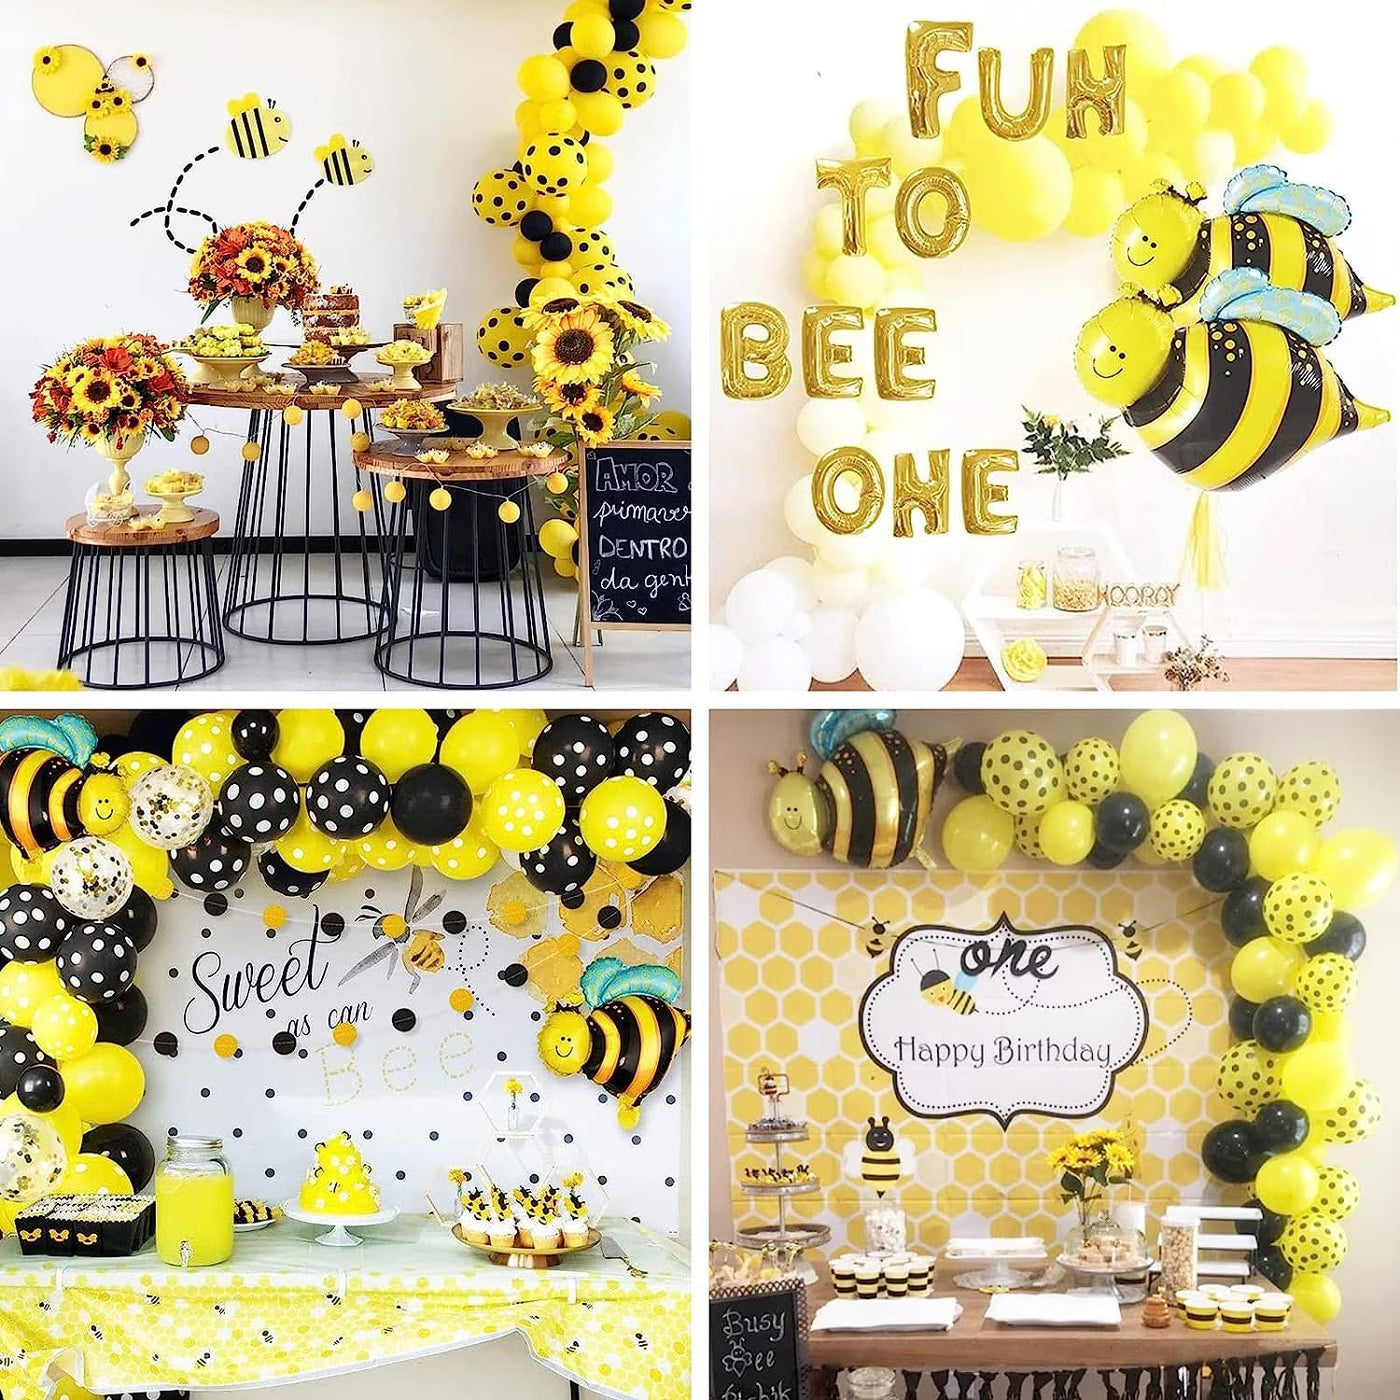 Bee Balloon Arch Garland has everything required for your summer decor. It's ideal for Easter, Gender reveals, birthdays, baby showers, graduations, and seasonal occasions. The latex balloons are biodegradable and made with natural materials, perfect for impressing your visitors.